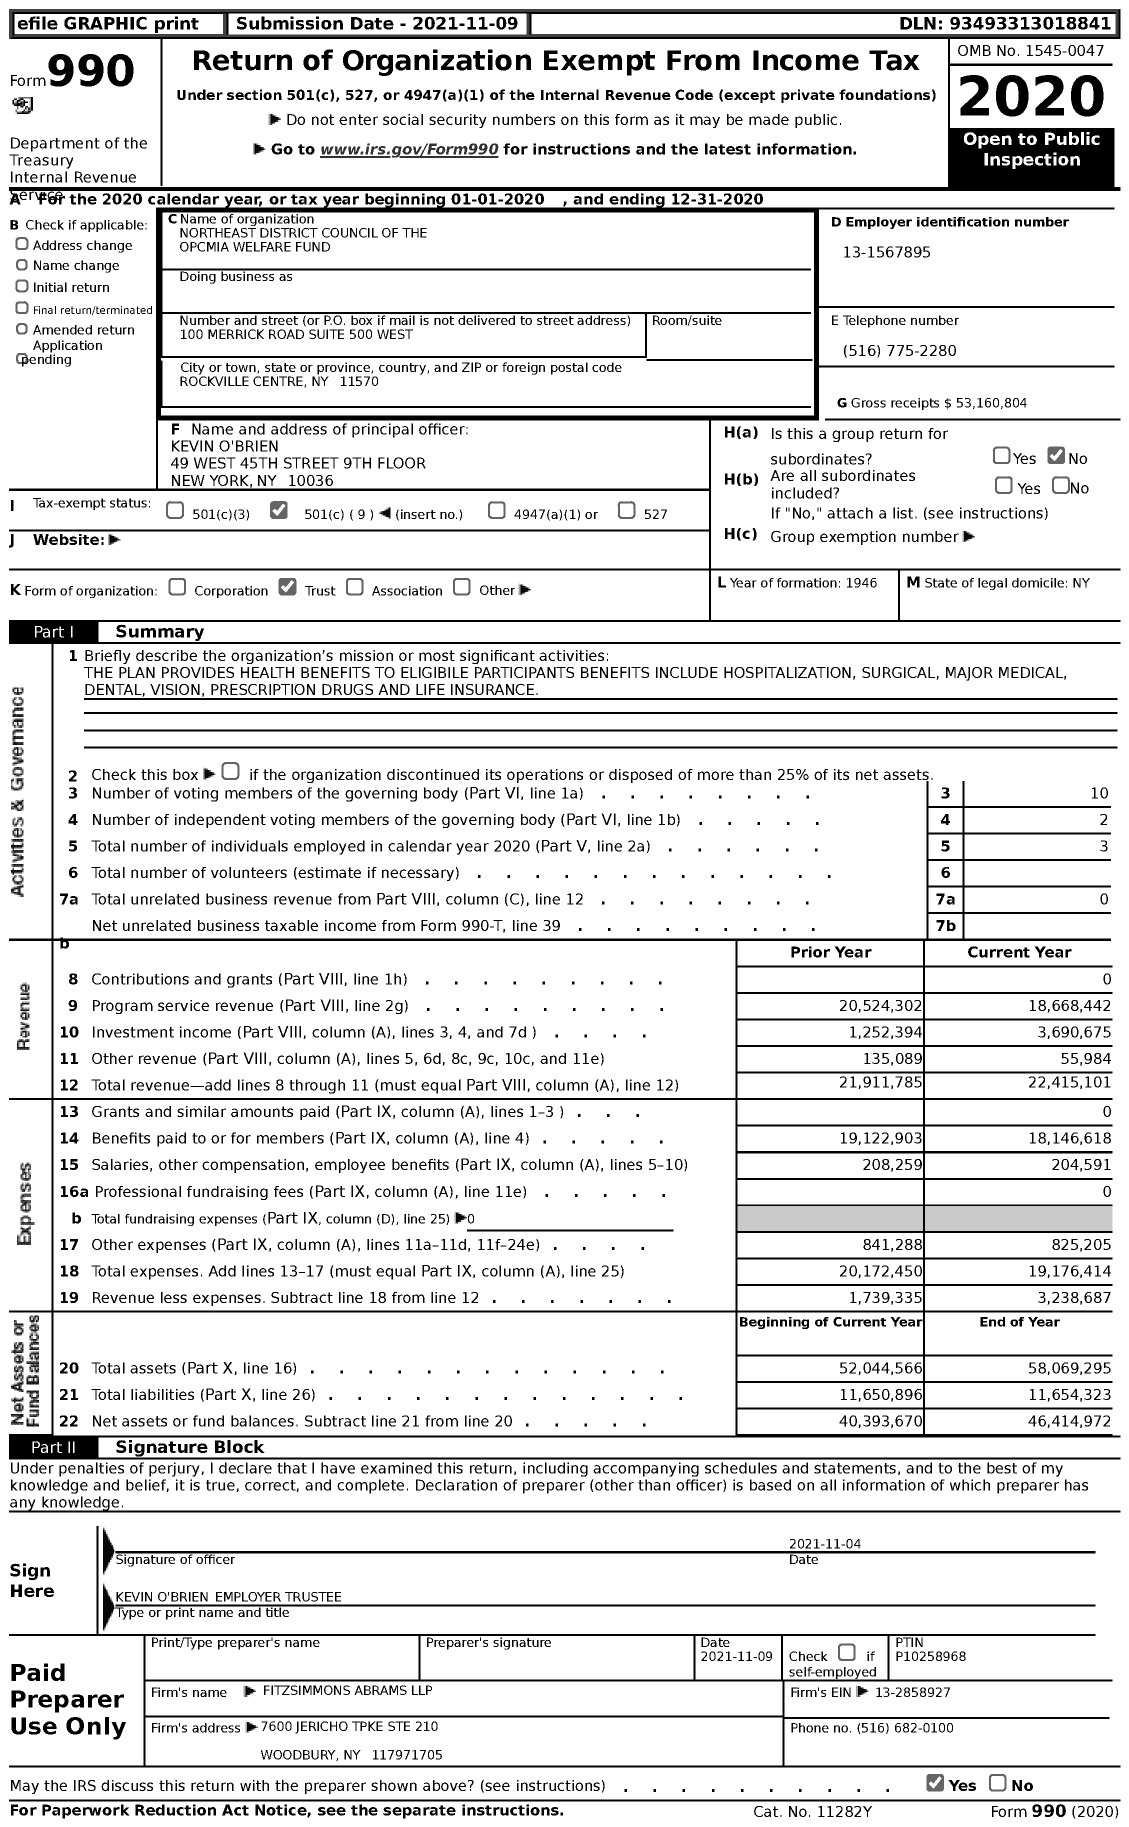 Image of first page of 2020 Form 990 for Northeast District Council of the Opcmia Welfare Fund